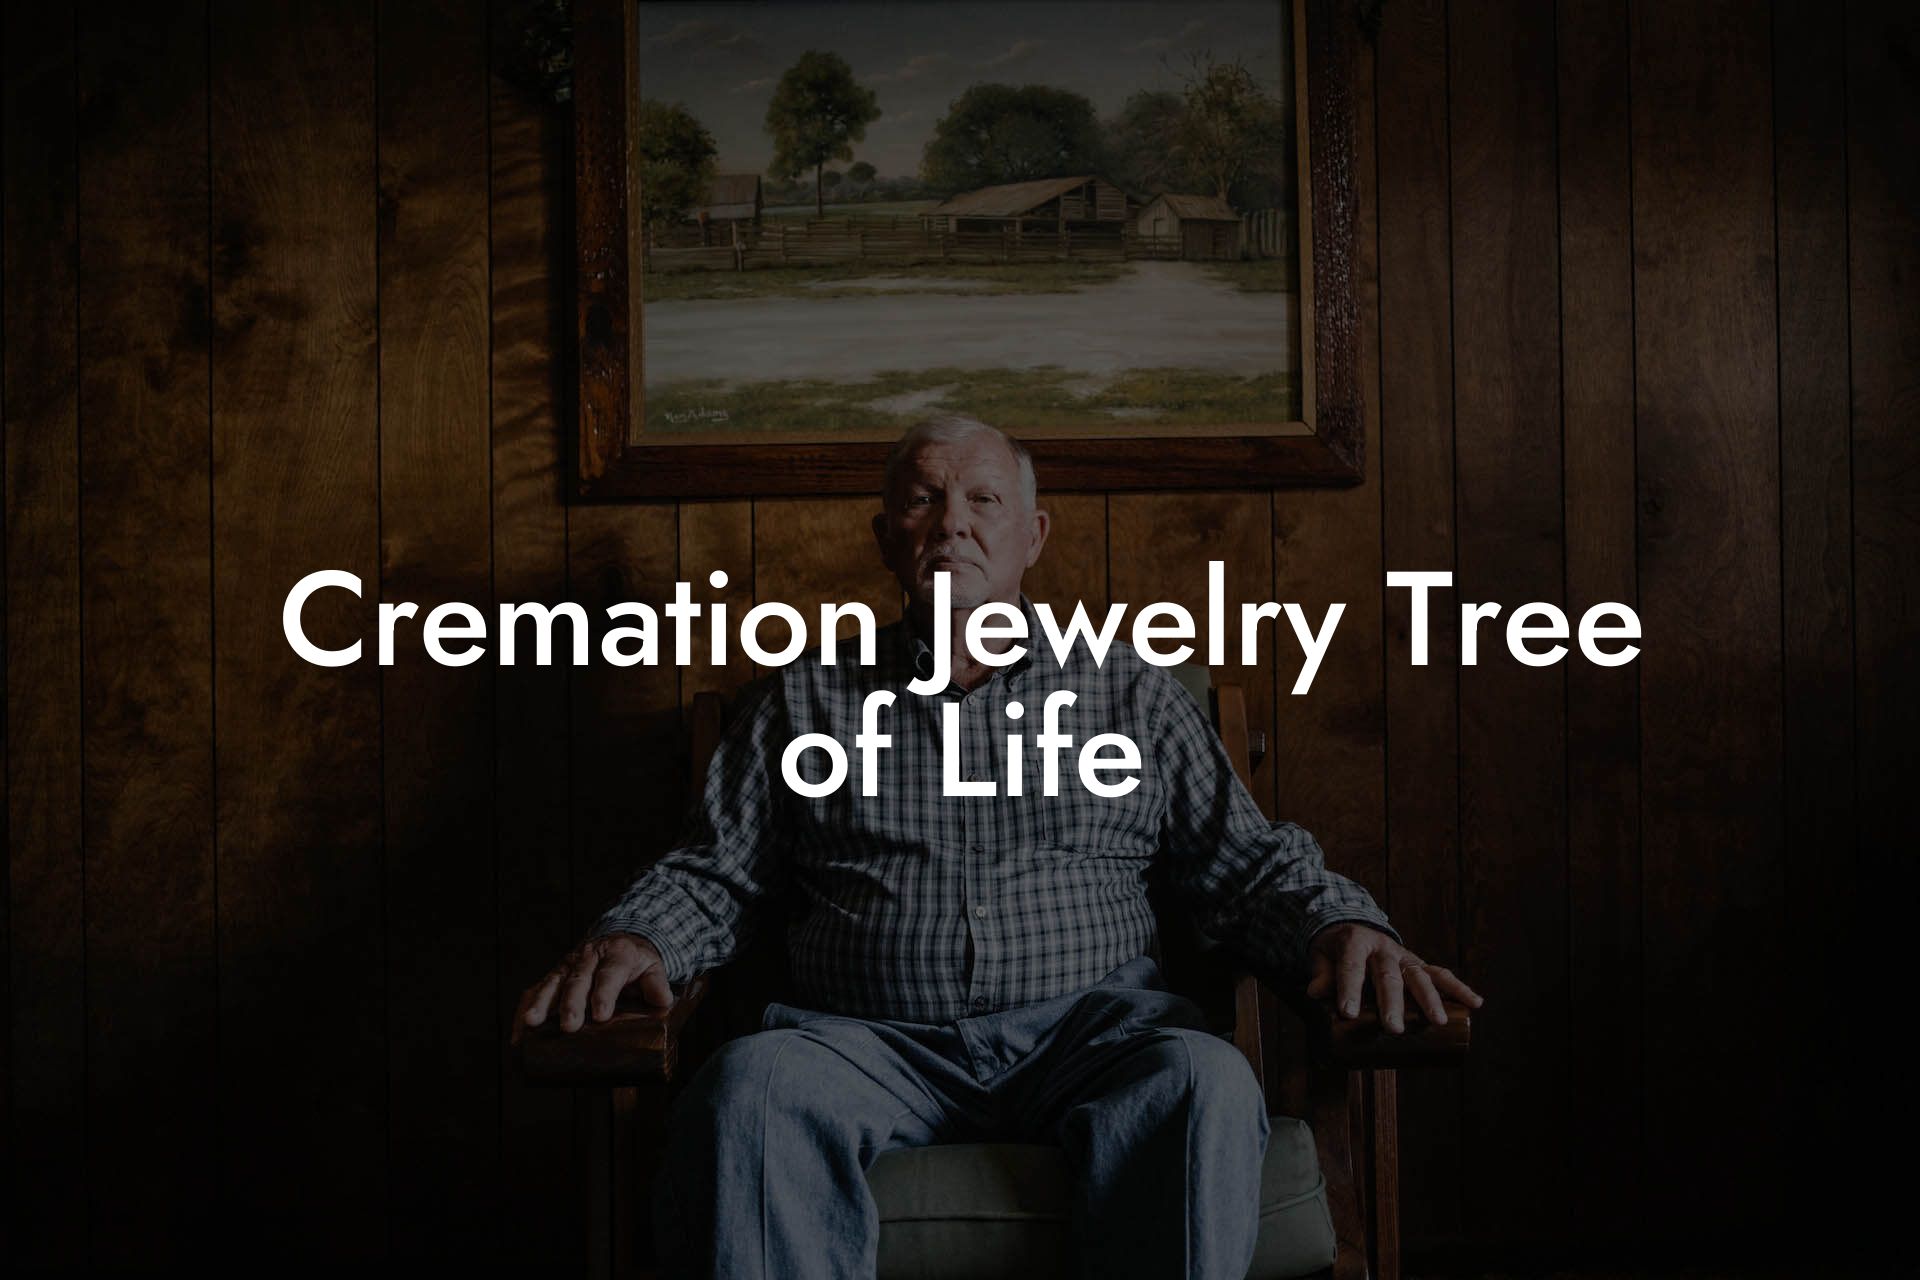 Cremation Jewelry Tree of Life